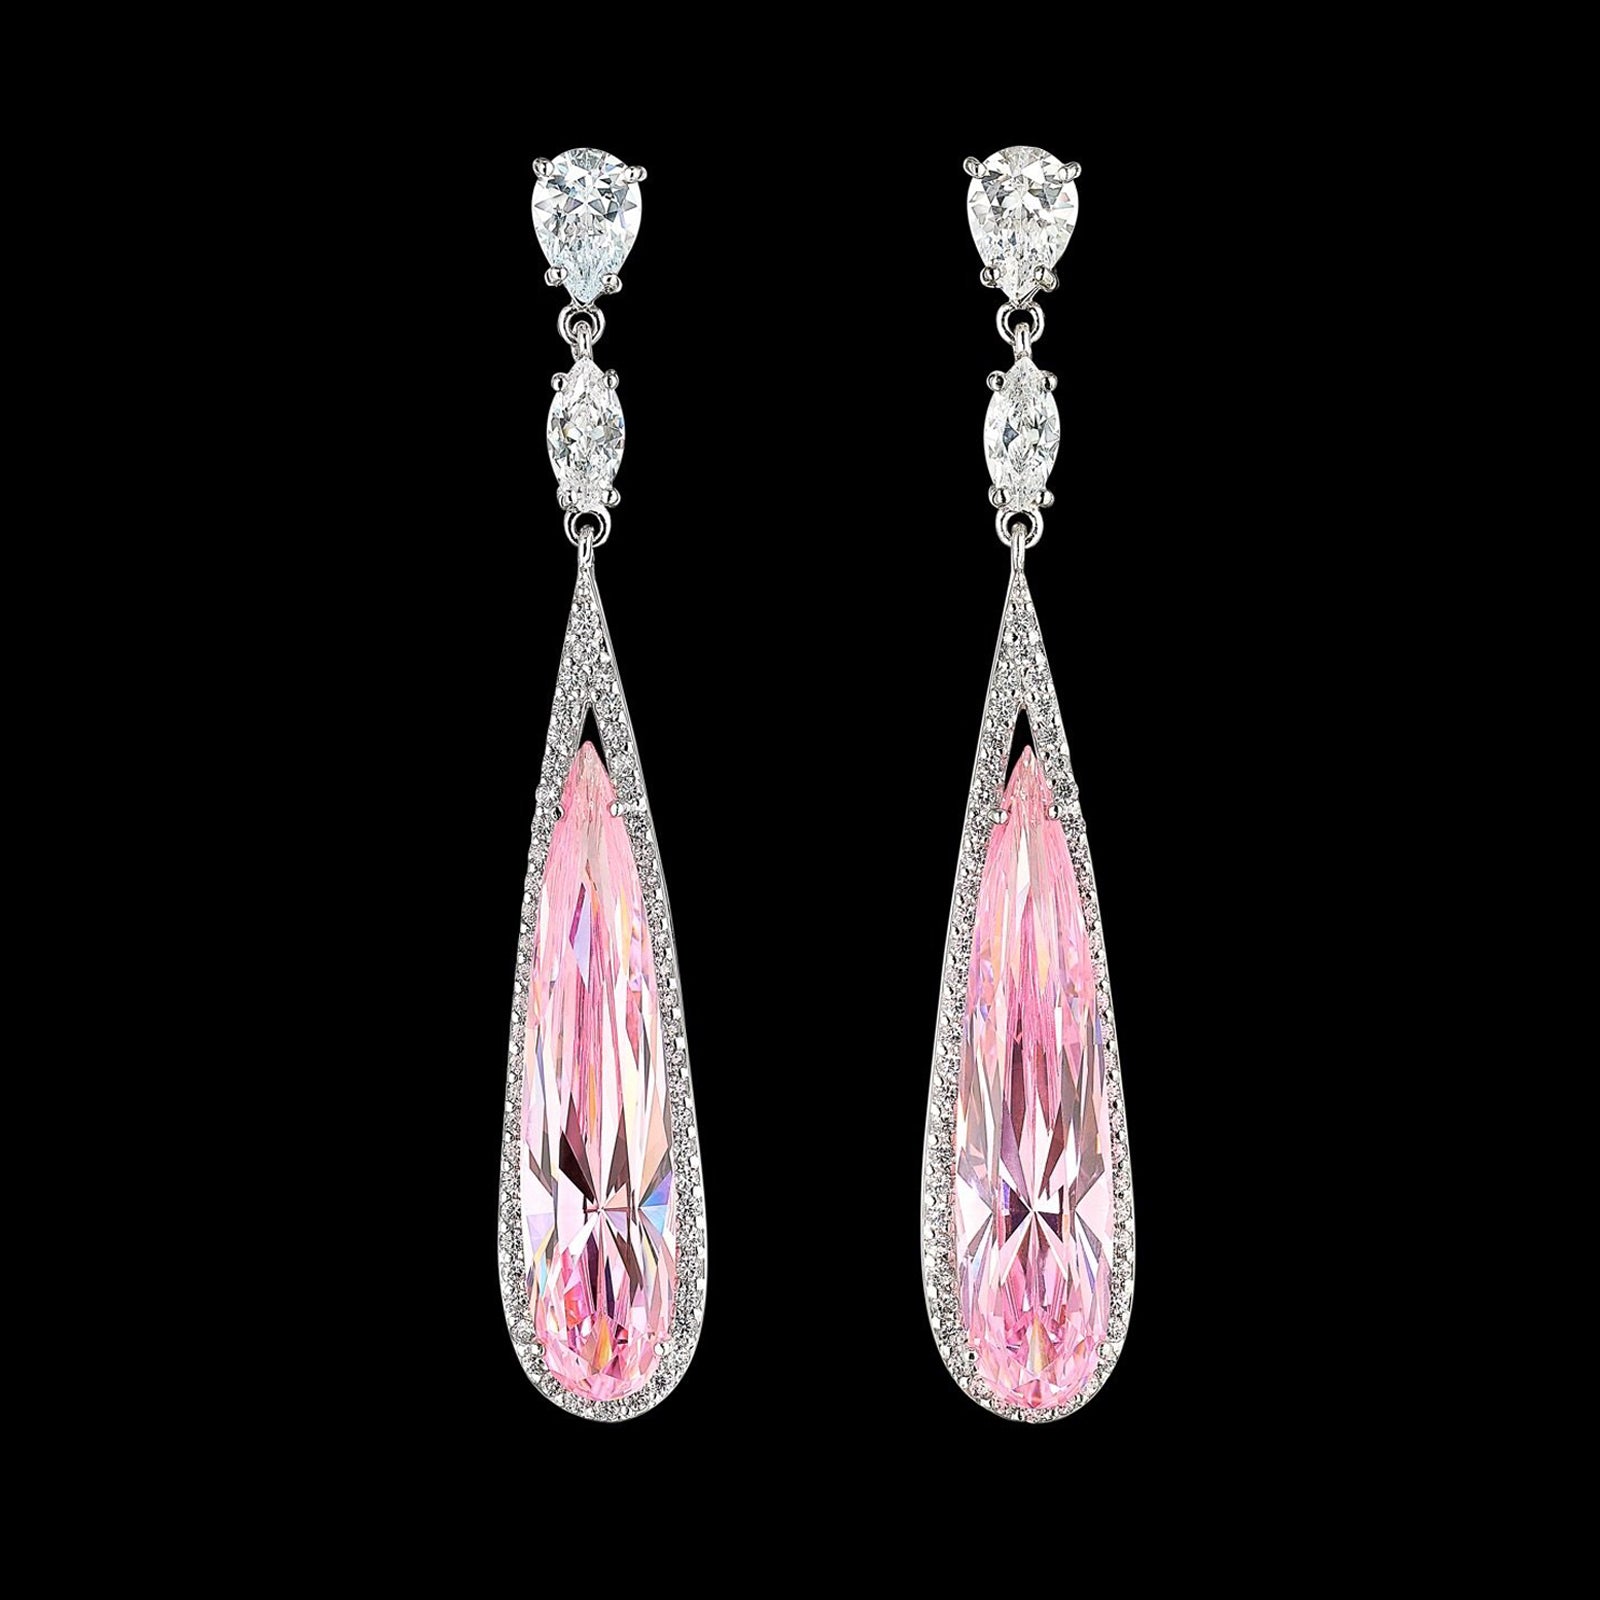 Blush Rose Shard Earrings, Earring, Anabela Chan Joaillerie - Fine jewelry with laboratory grown and created gemstones hand-crafted in the United Kingdom. Anabela Chan Joaillerie is the first fine jewellery brand in the world to champion laboratory-grown and created gemstones with high jewellery design, artisanal craftsmanship and a focus on ethical and sustainable innovations.